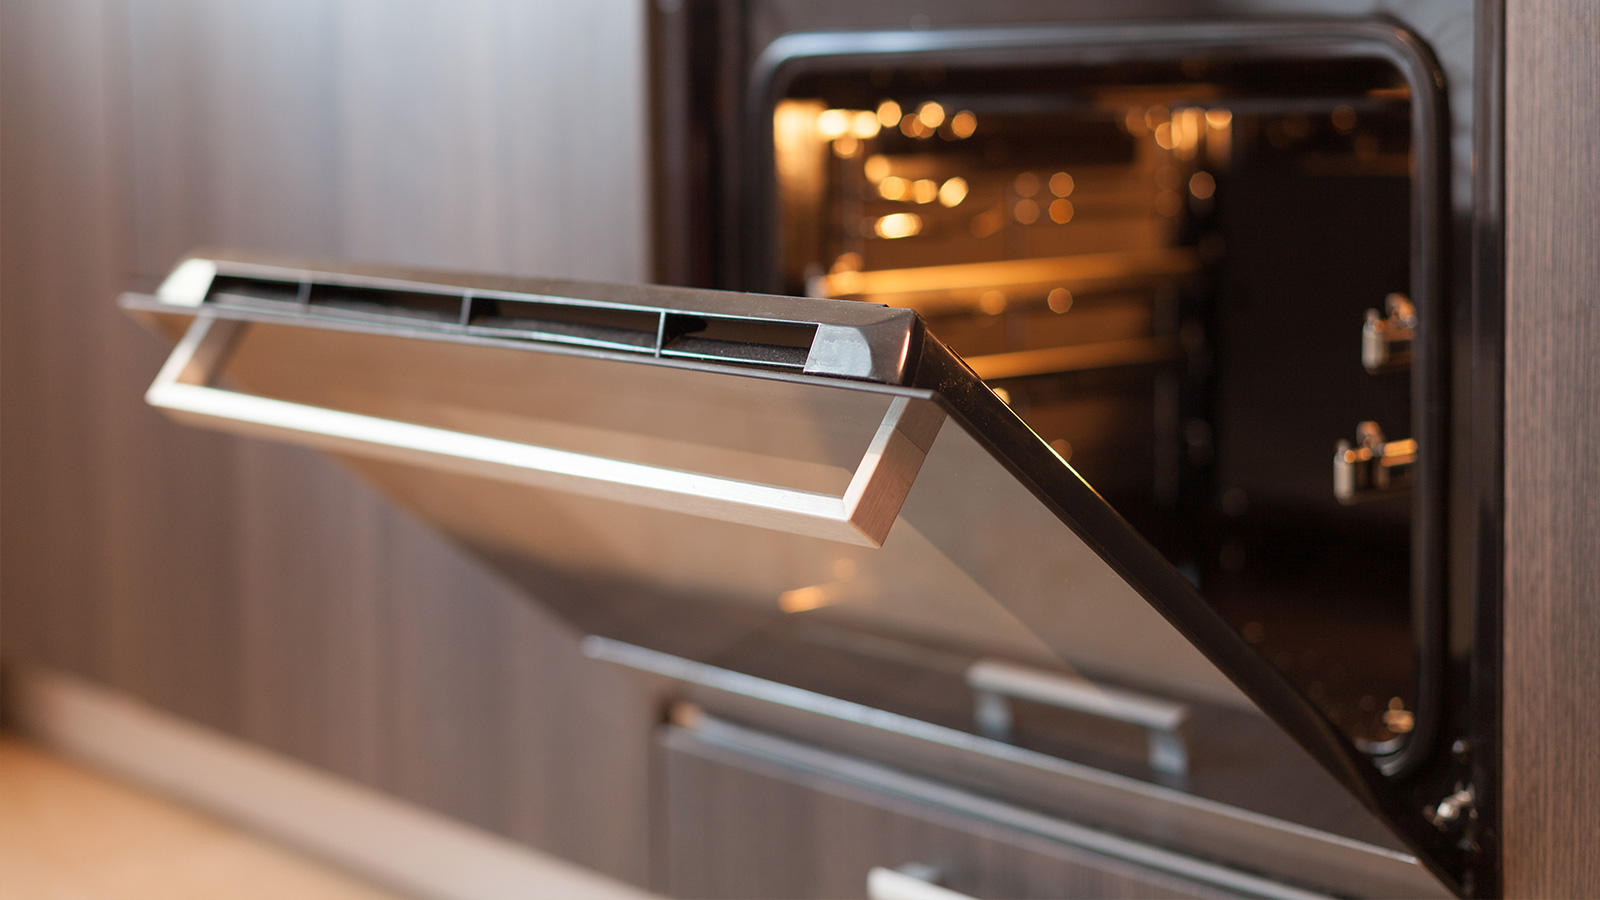 Easy Hacks to Cut Down Your Appliances’ Energy Use